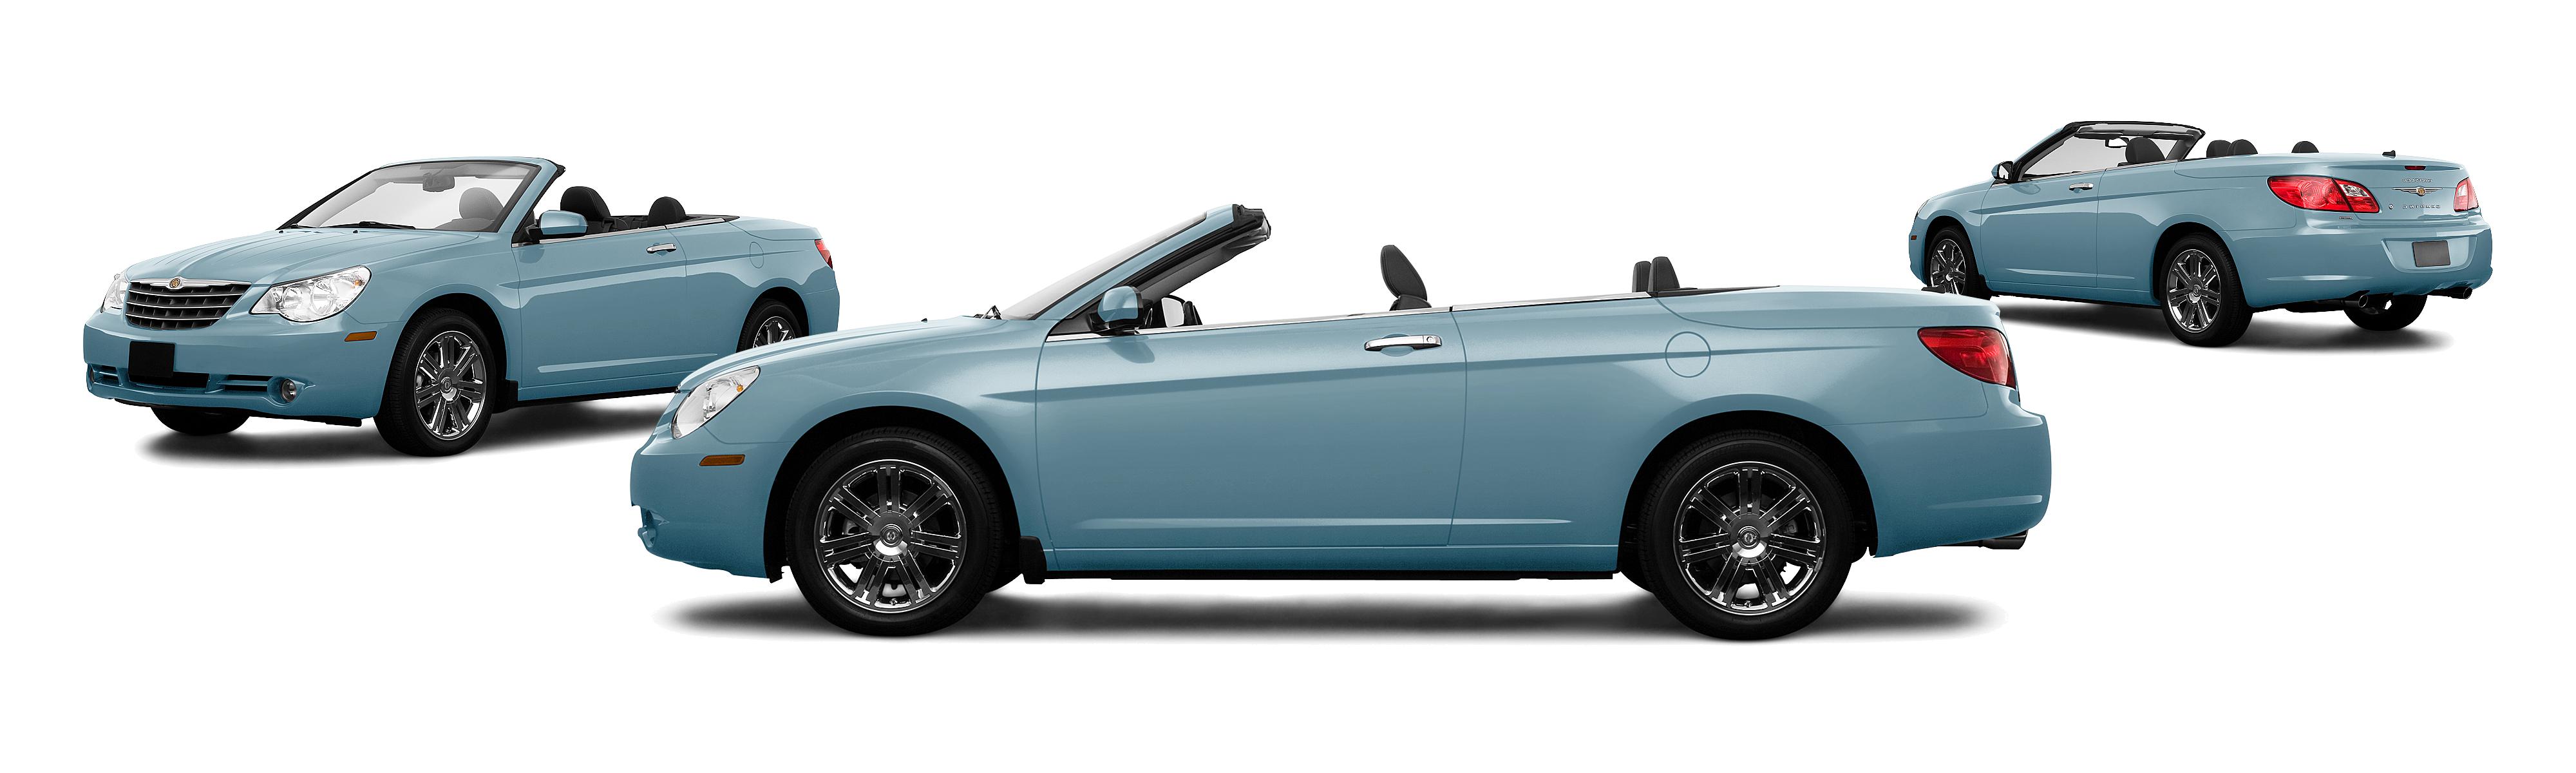 2009 Chrysler Sebring Limited 2dr Convertible - Research - GrooveCar